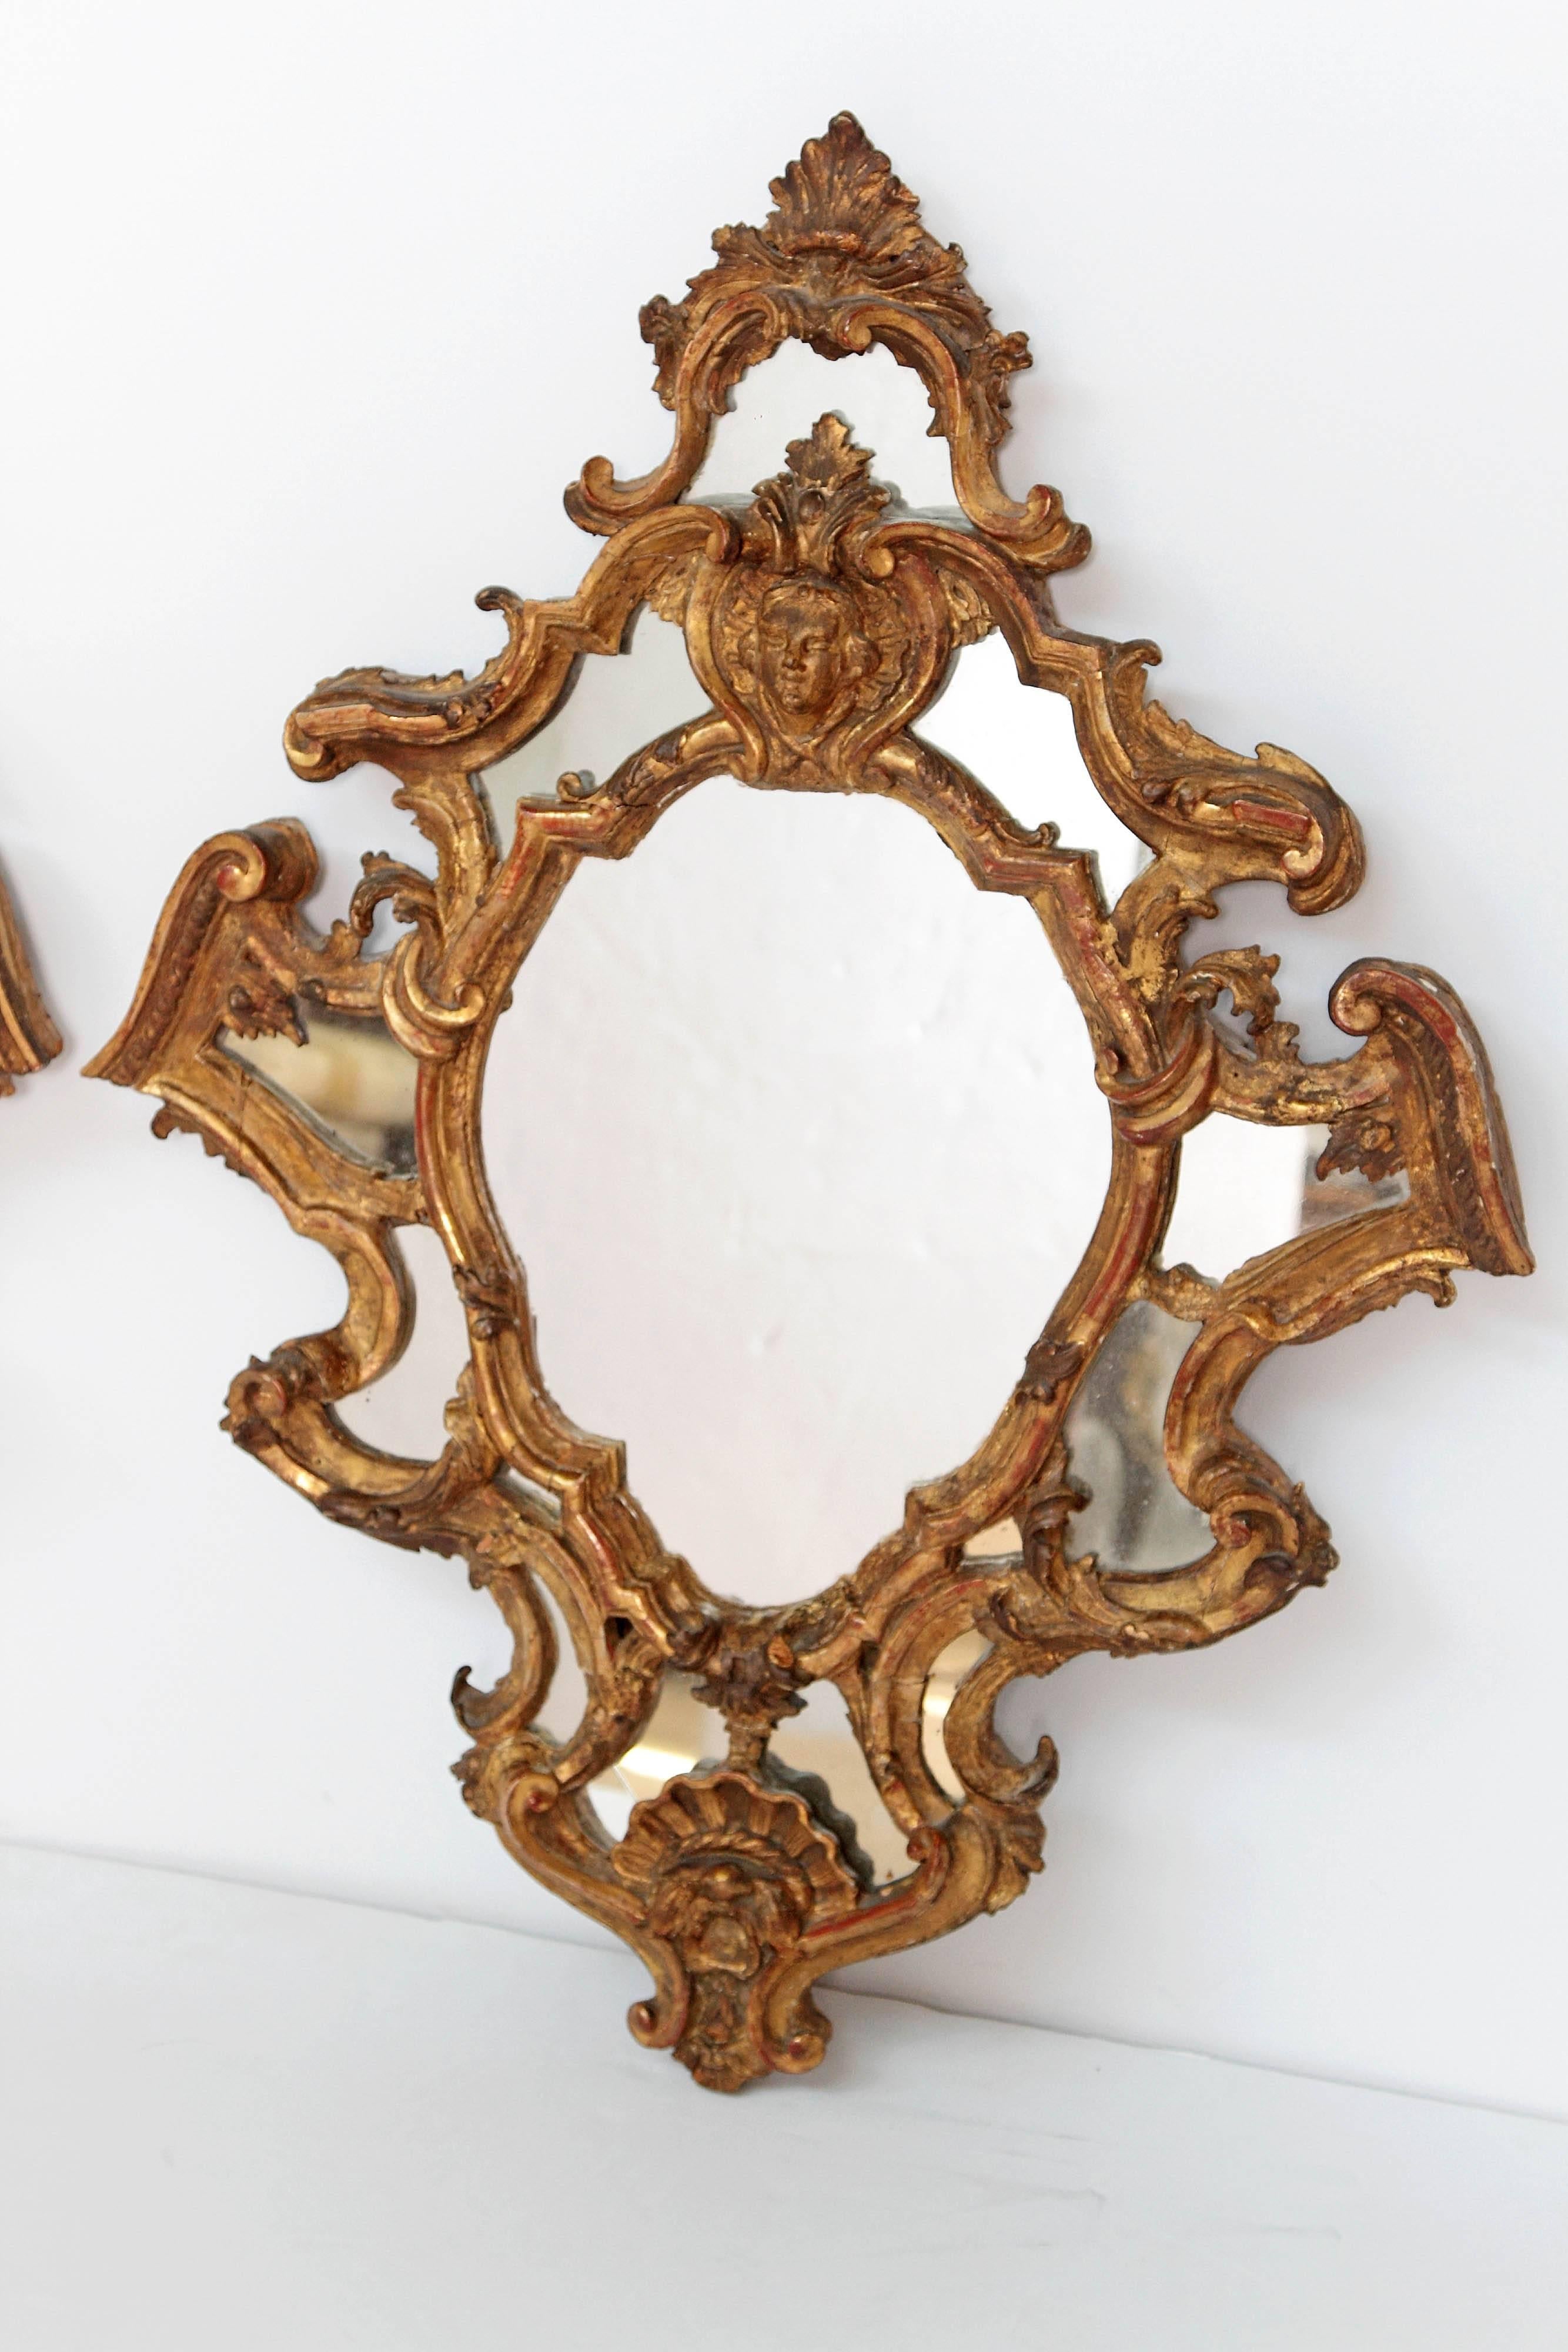 A beautiful pair of elaborately carved Venetian giltwood mirrors. Female masks mounted on the top with curves and internal reserves separating the mirror plate.